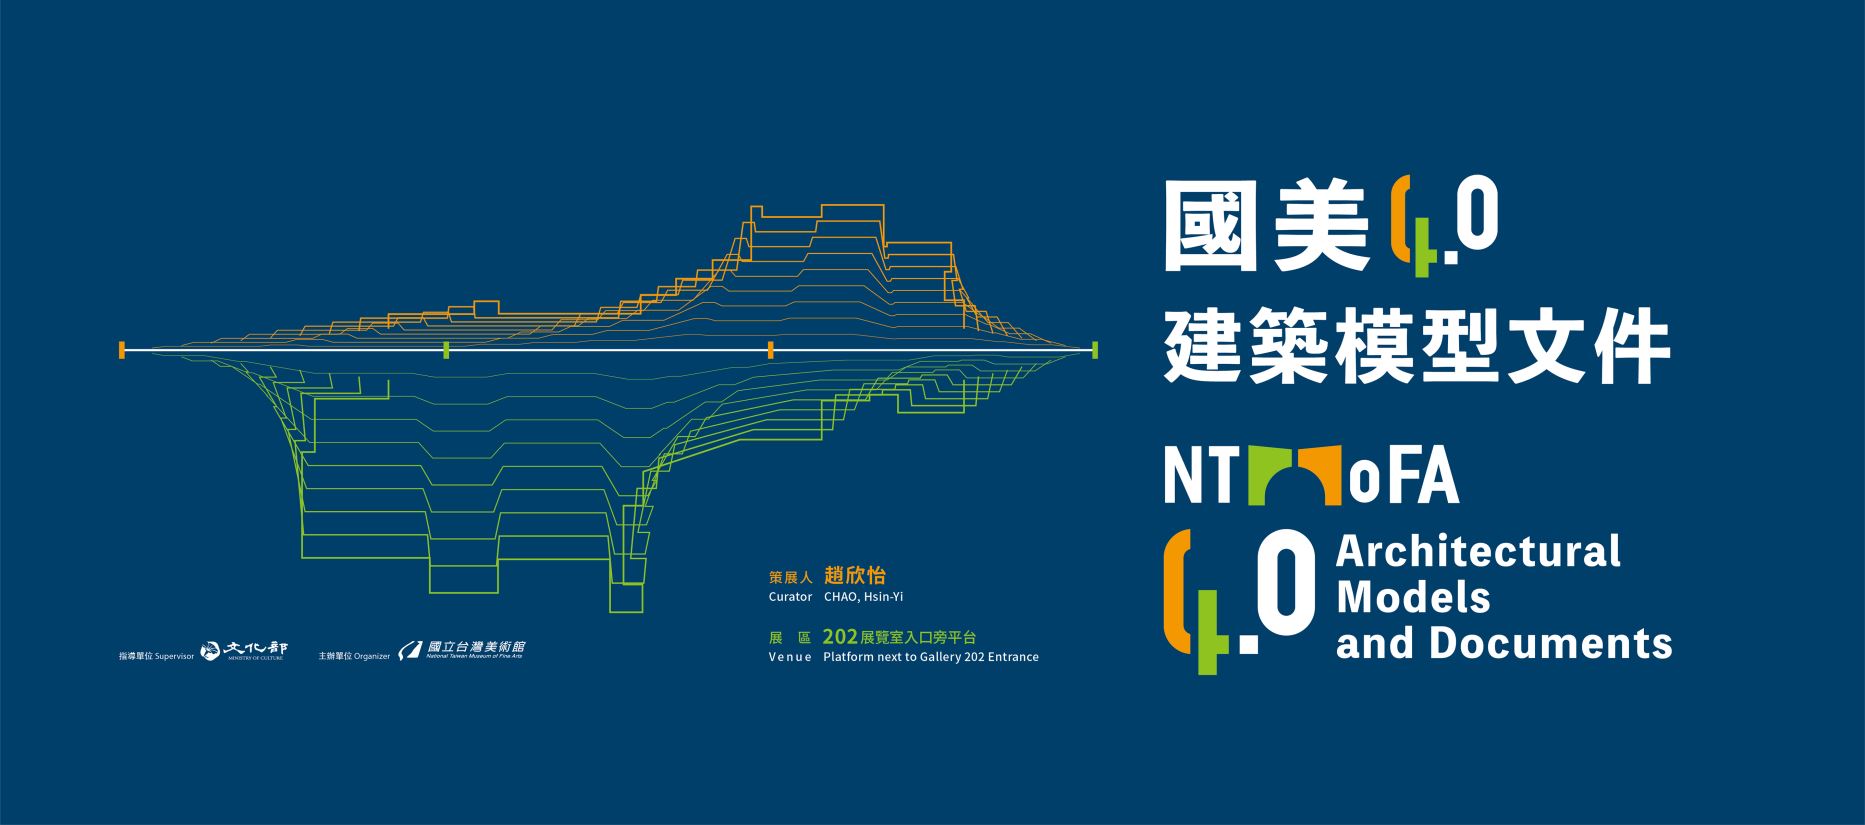 Exhibition of NTMOFA 4.0 Architectural Models and Documents